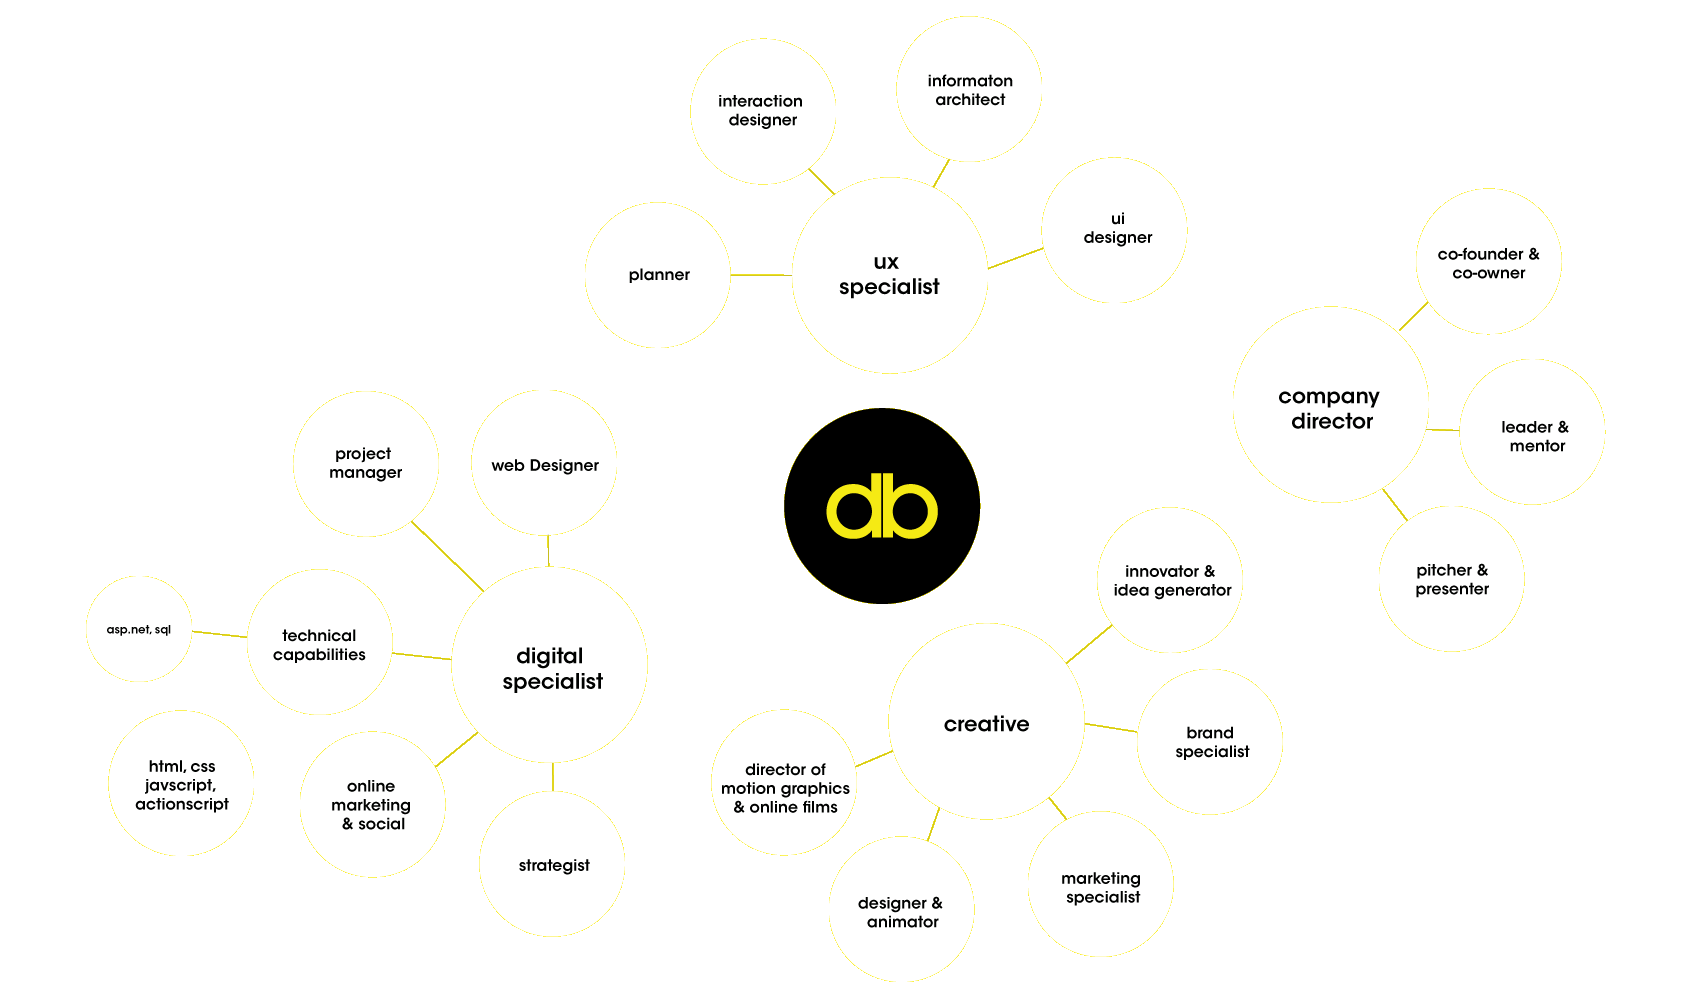 db - skills and experience